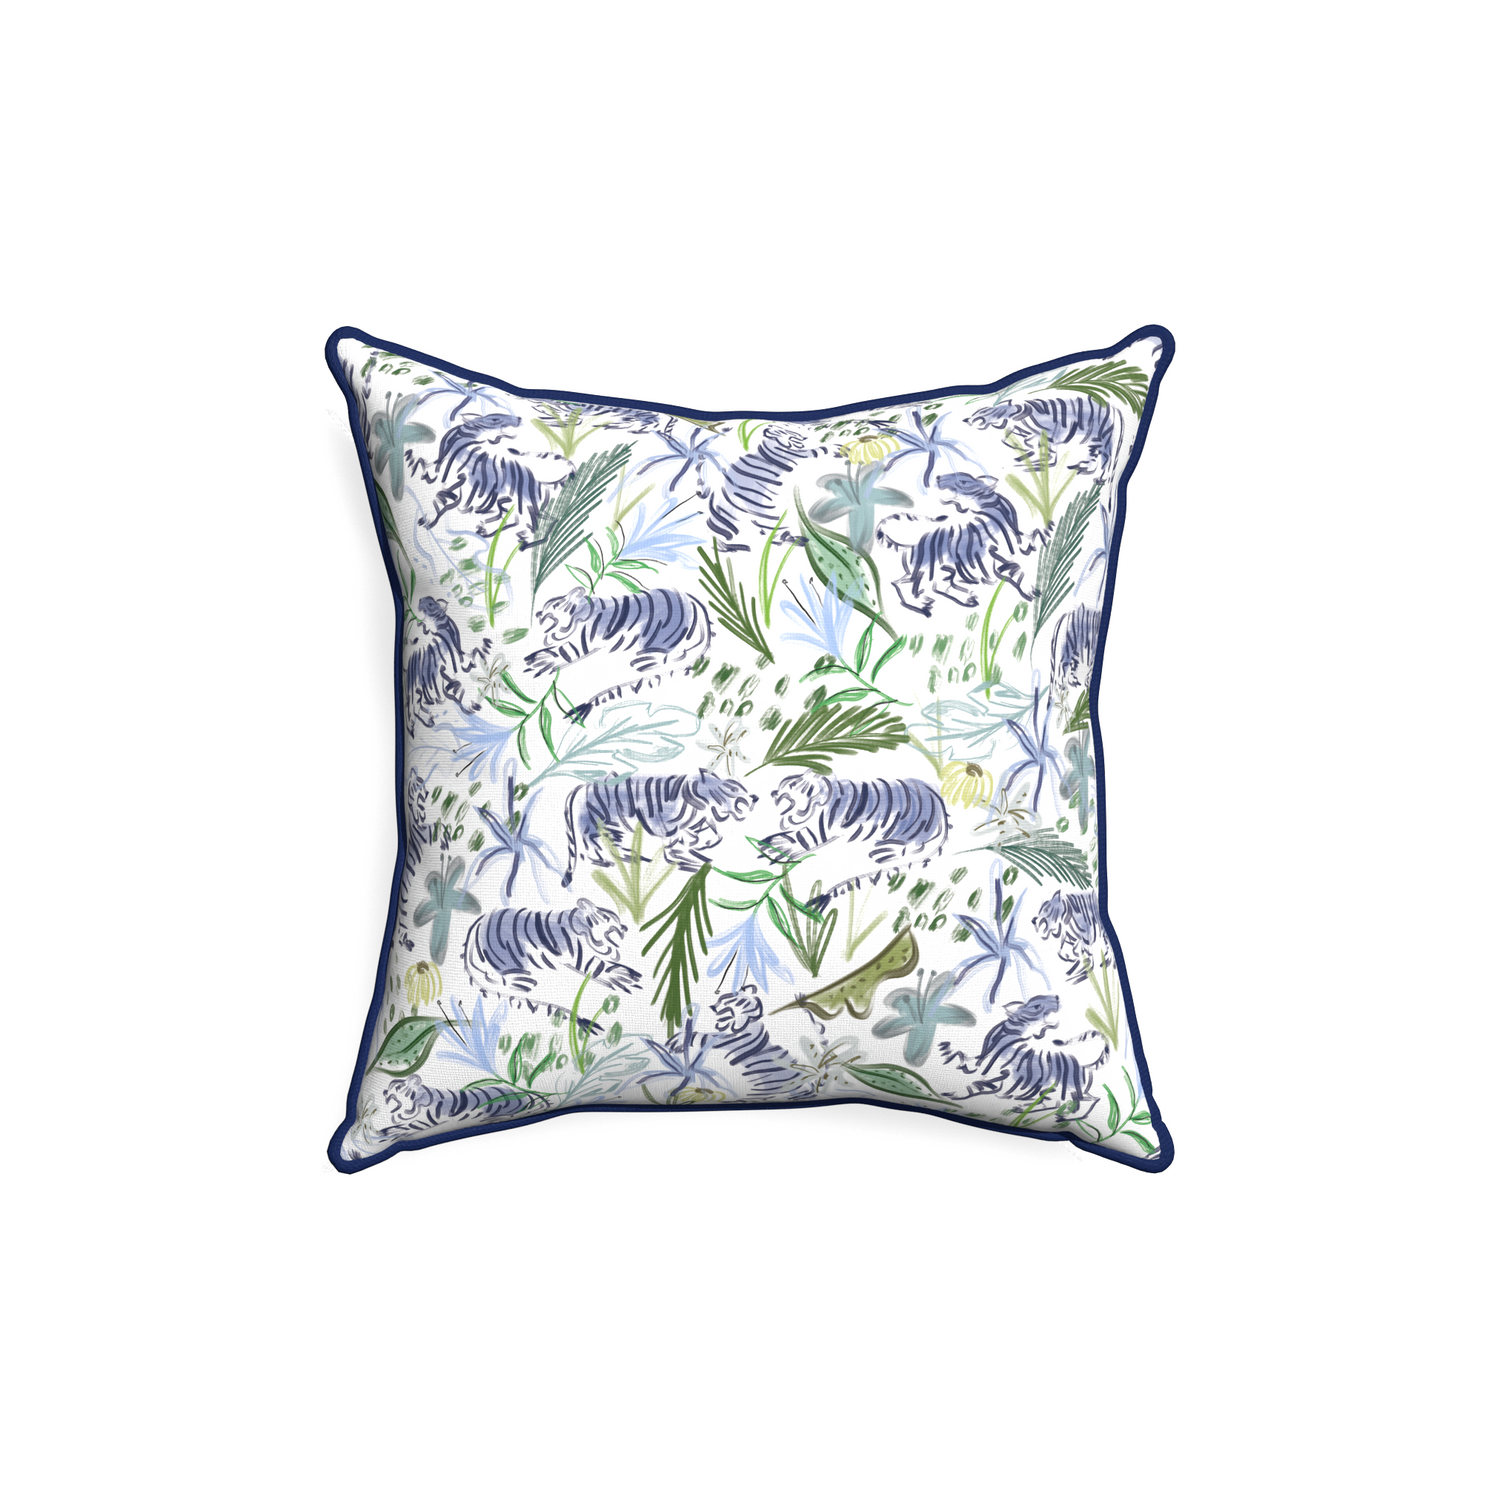 18-square frida green custom pillow with midnight piping on white background